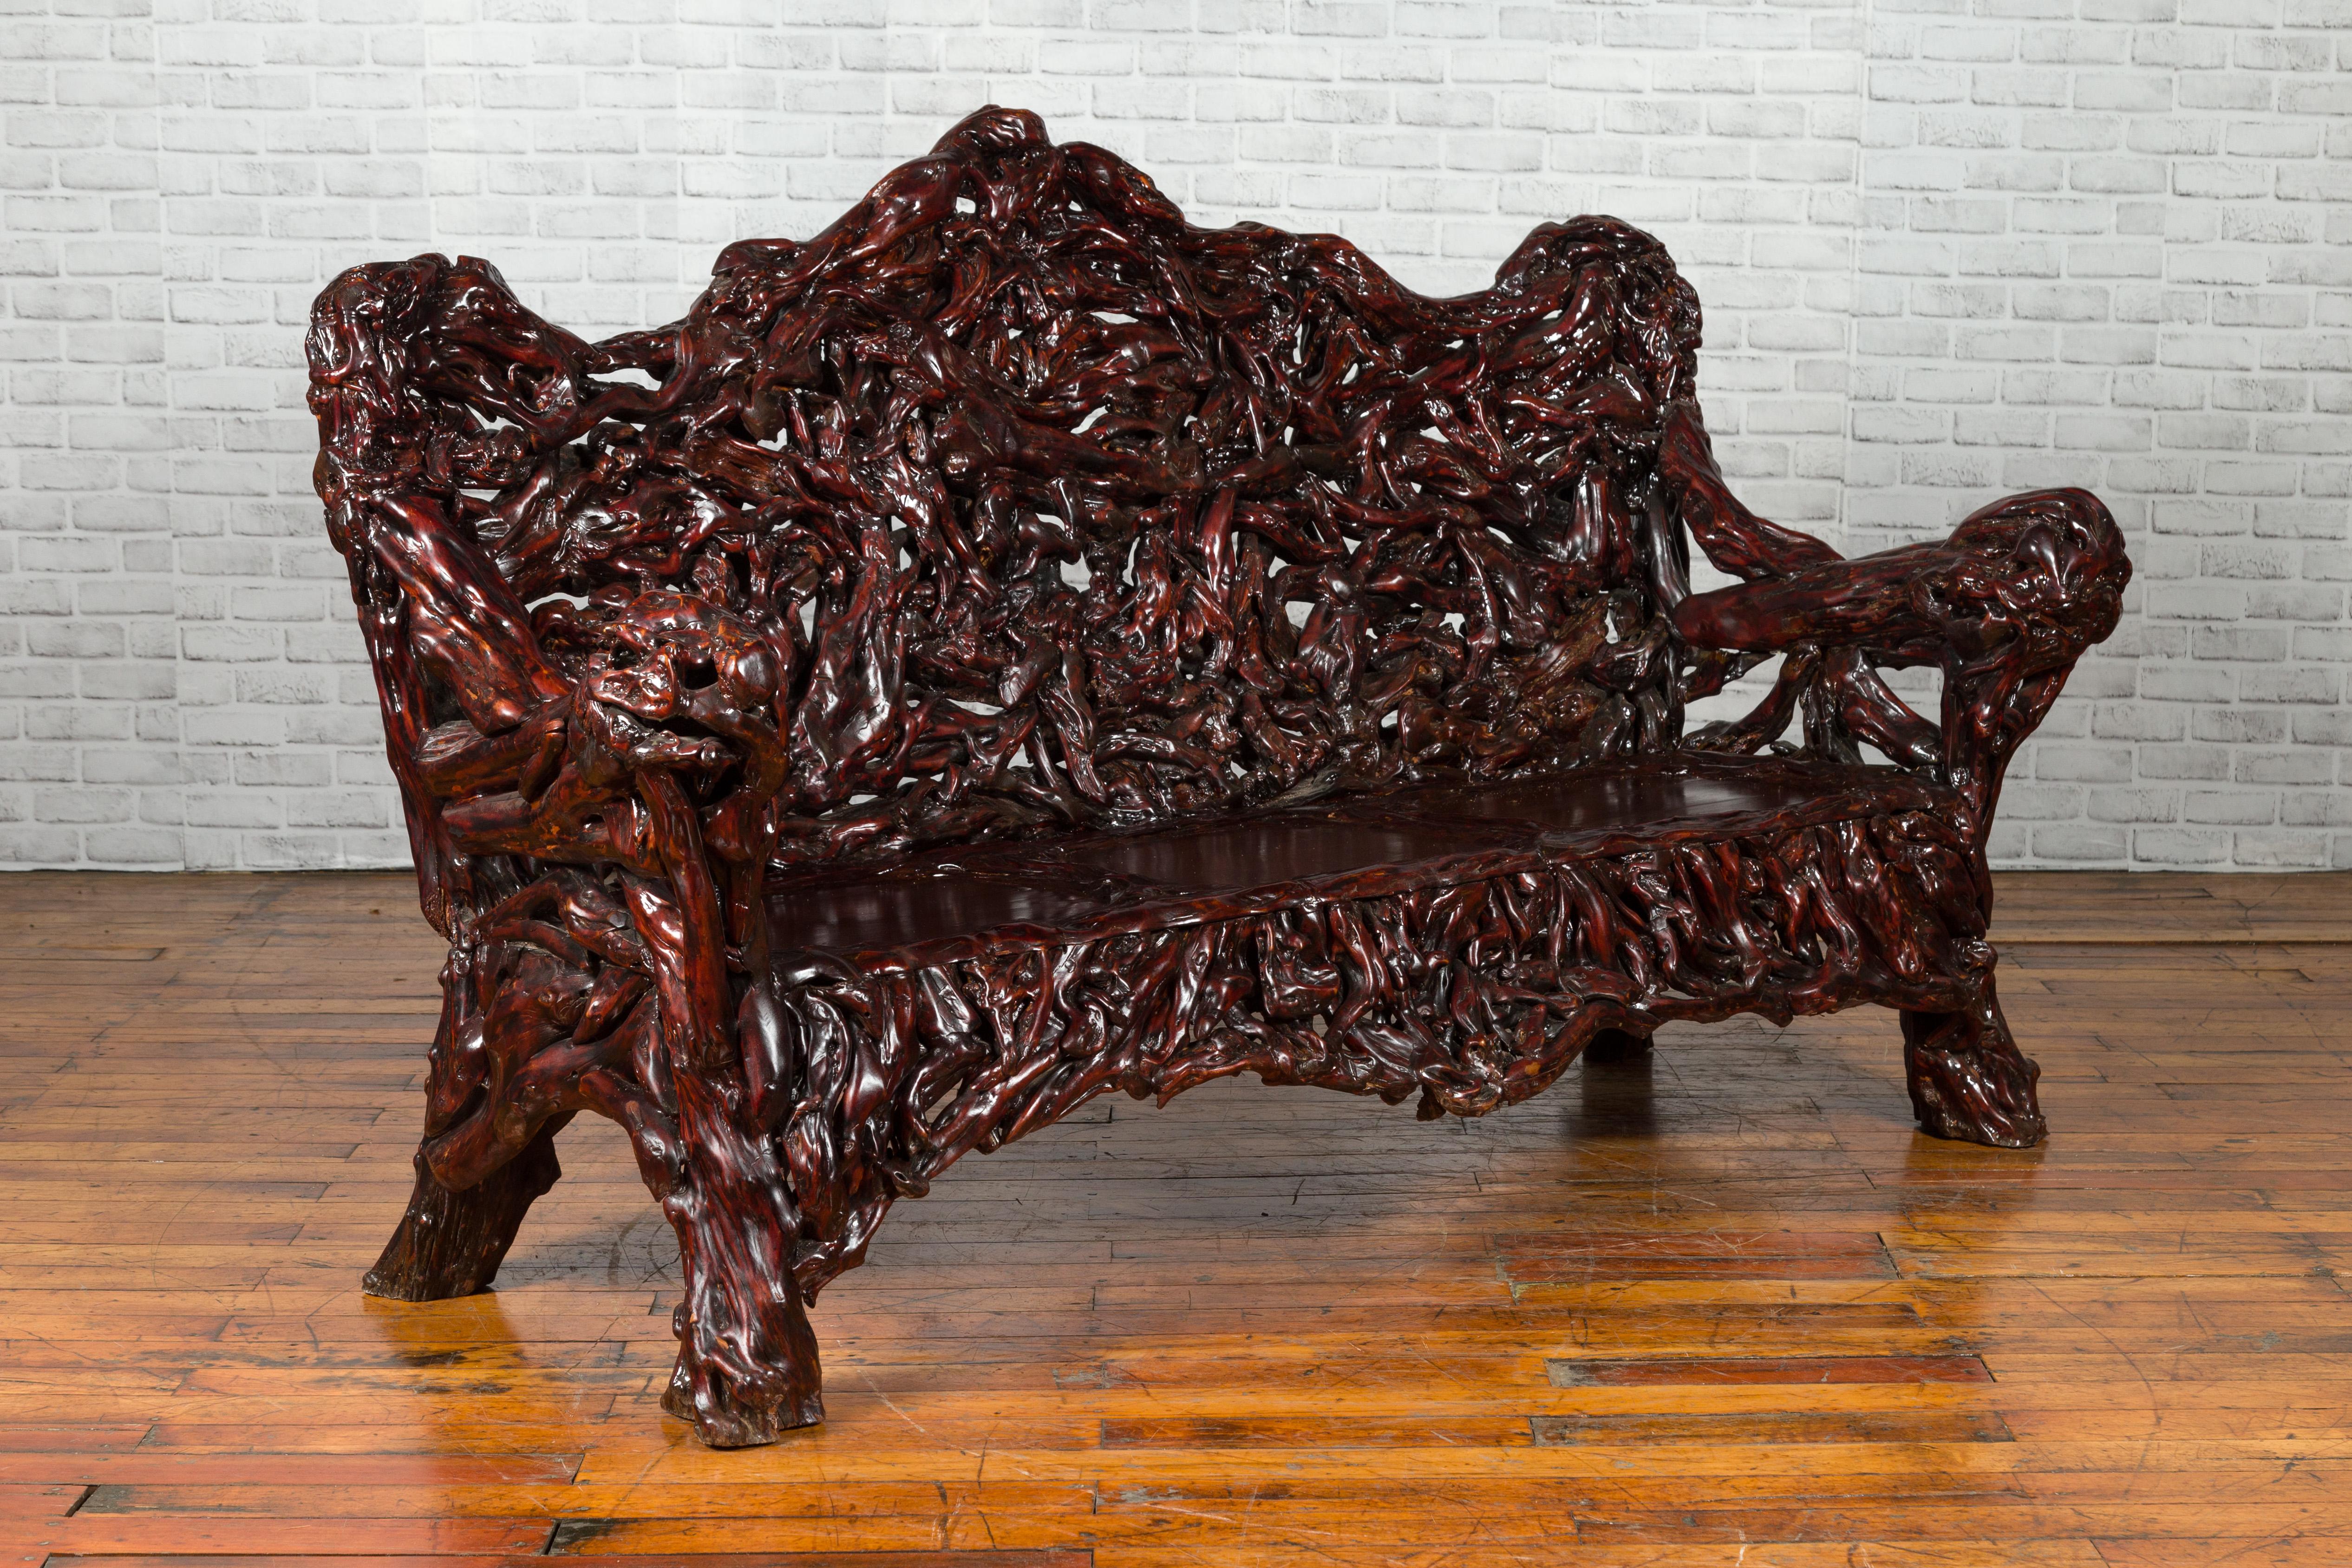 A Chinese settee from the late 20th century, hand carved out of one complete azalea root. Created in China during the later years of the 20th century, this striking settee was hand carved from an azalea root and lacquered to its reddish brown hue.